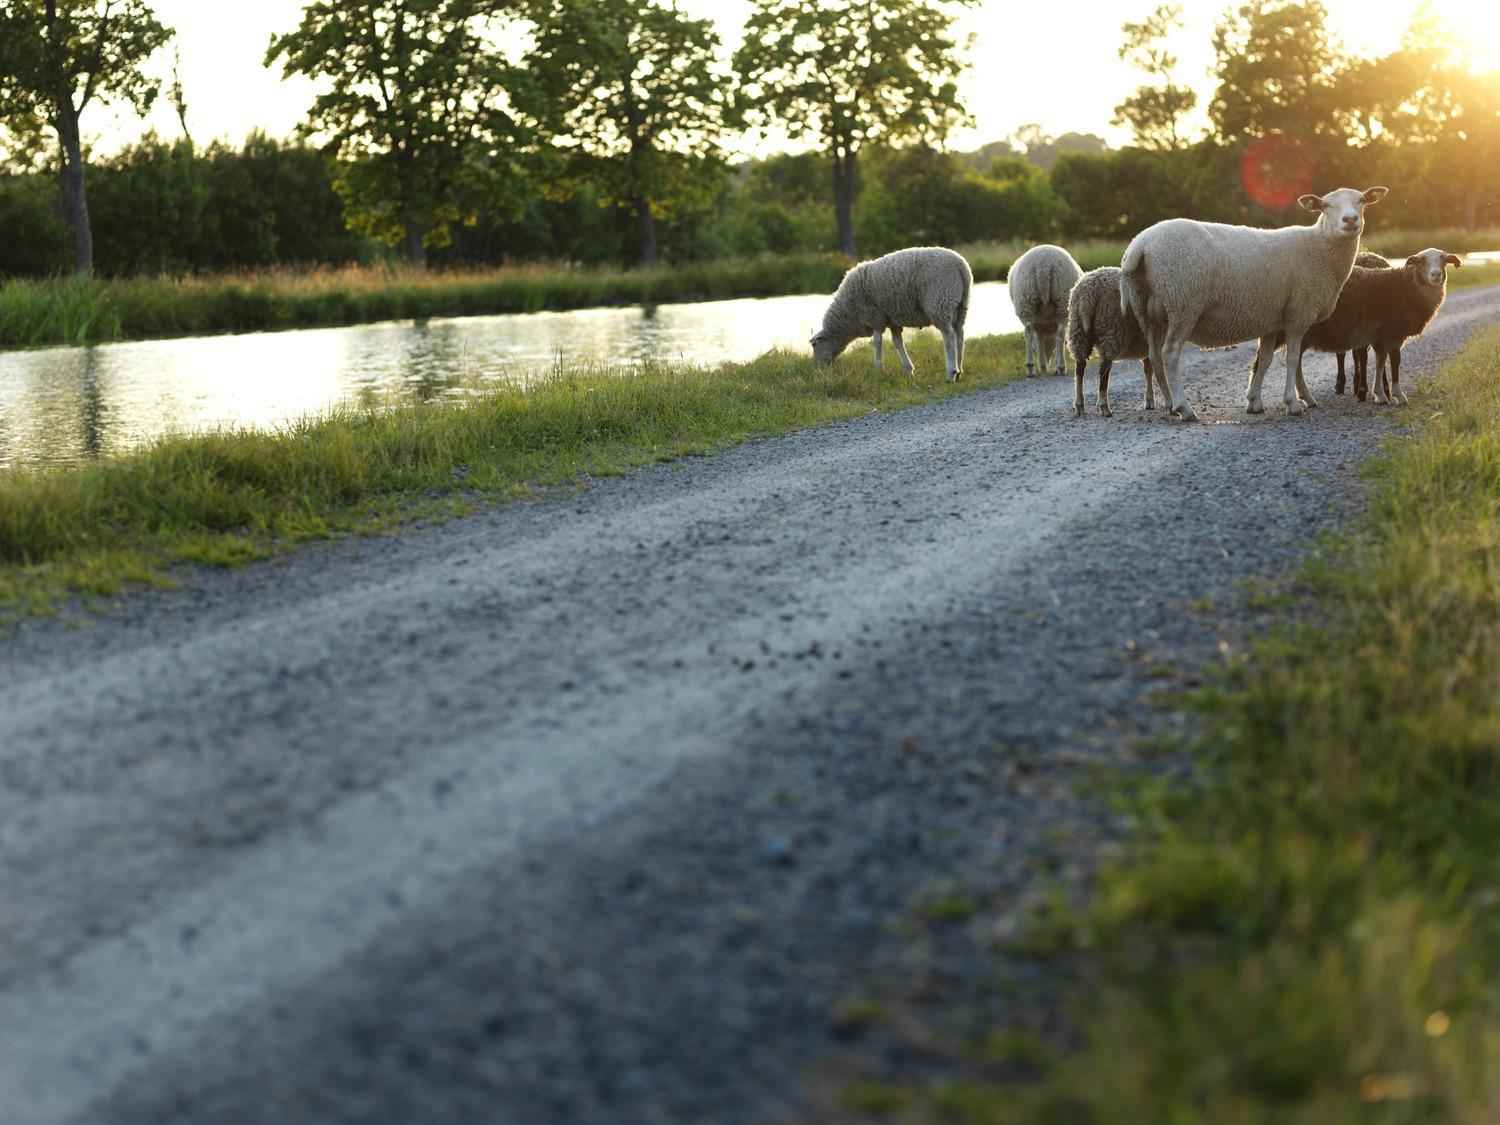 A couple of sheep are standing on a gravel road next to Göta Canal during a summer evening.